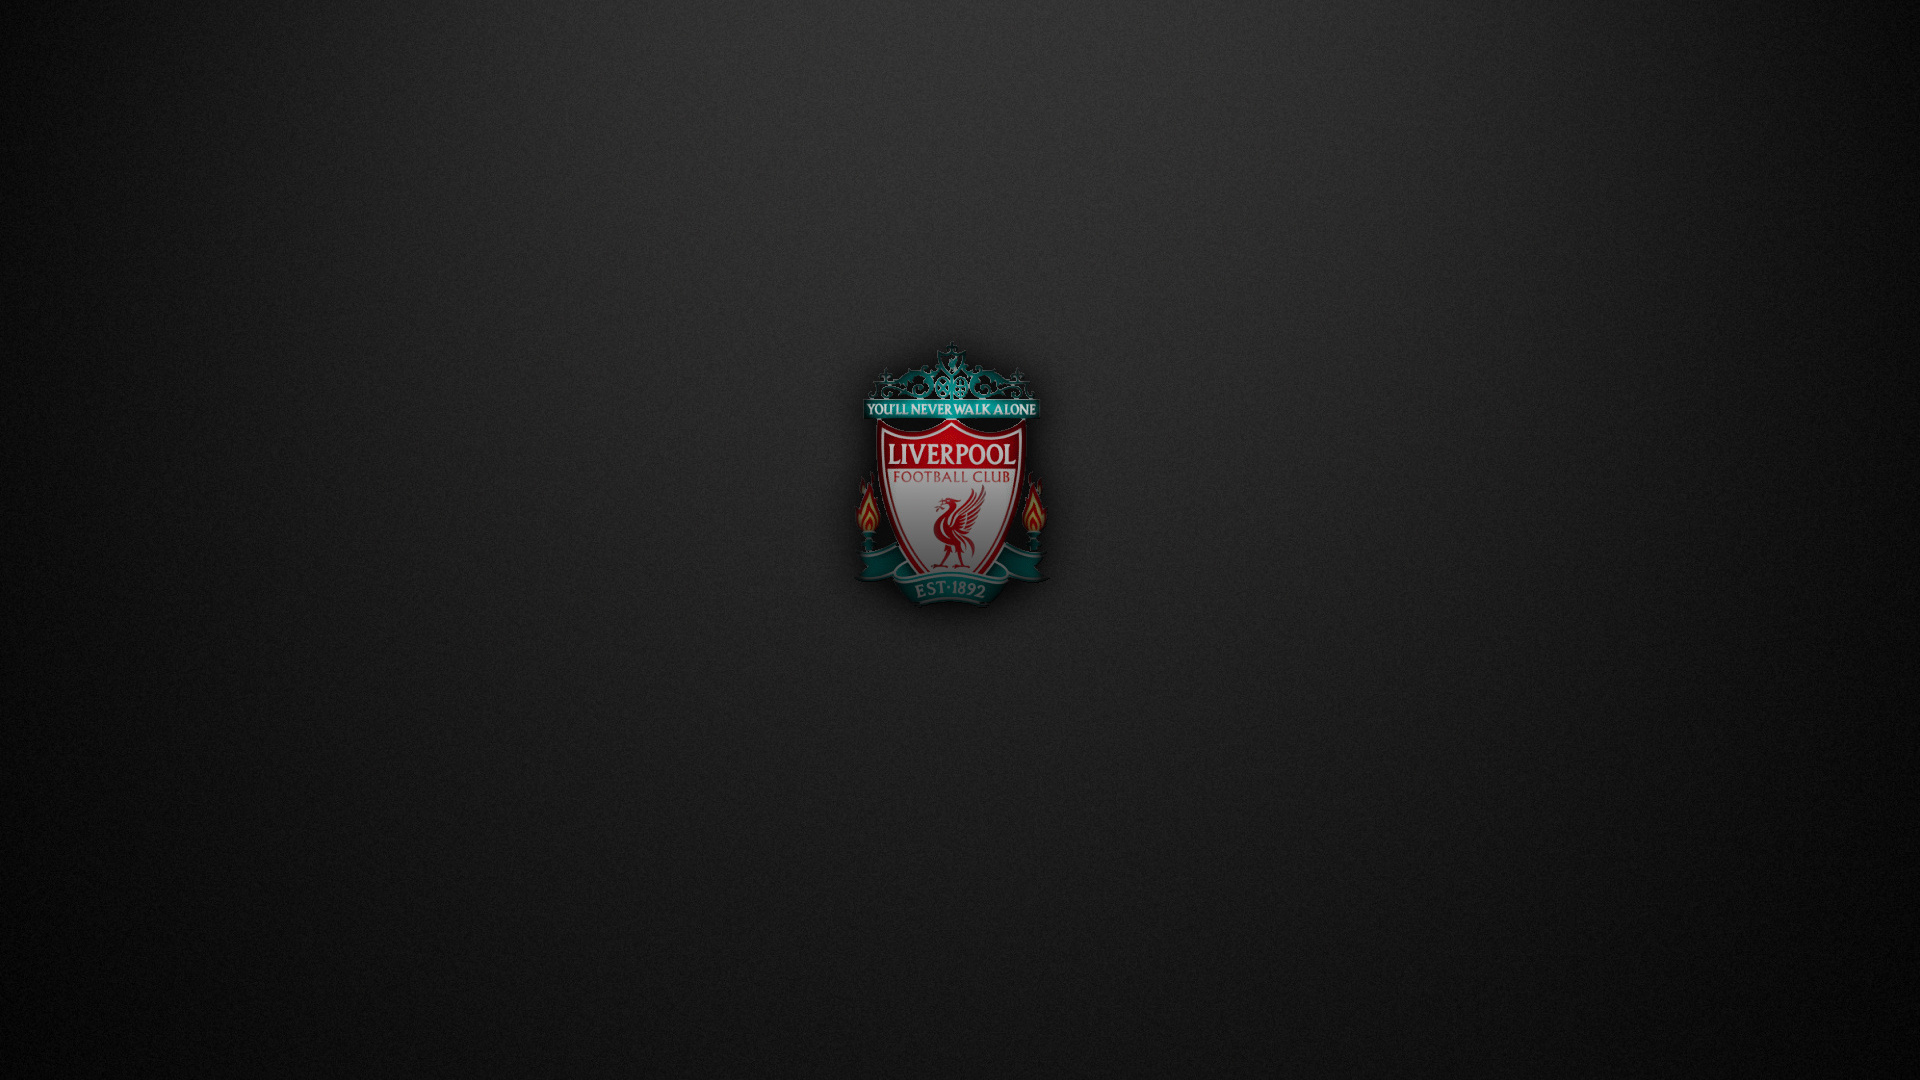 1920x1080 wallpaper, carbon, fc liverpool Wallpapers and Pictures ...